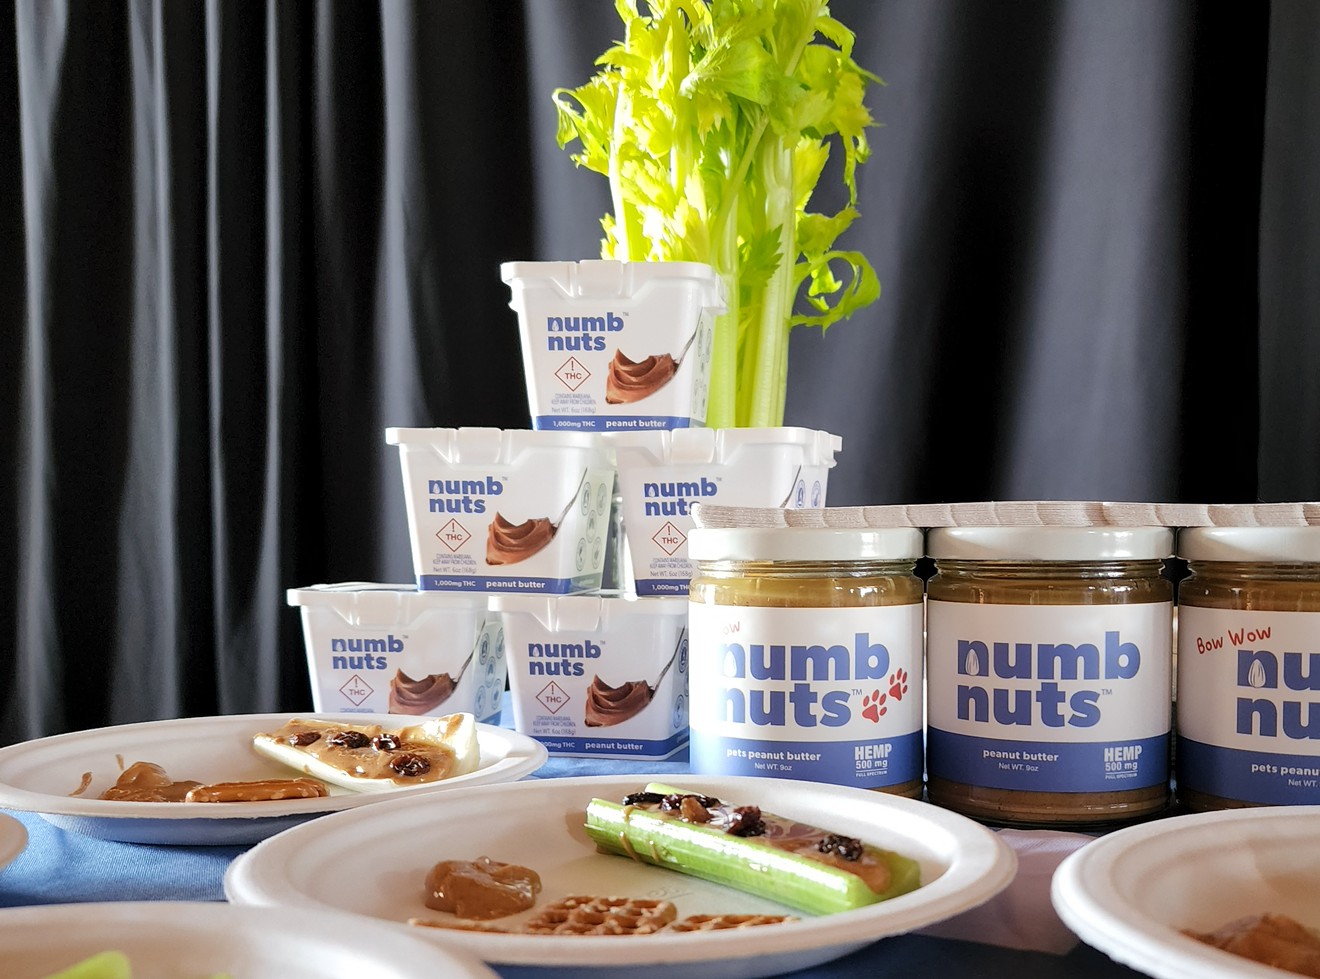 Numb Nuts began as a CBD-infused roasted nut brand, but has since branched out into CBD and THC peanut butters.